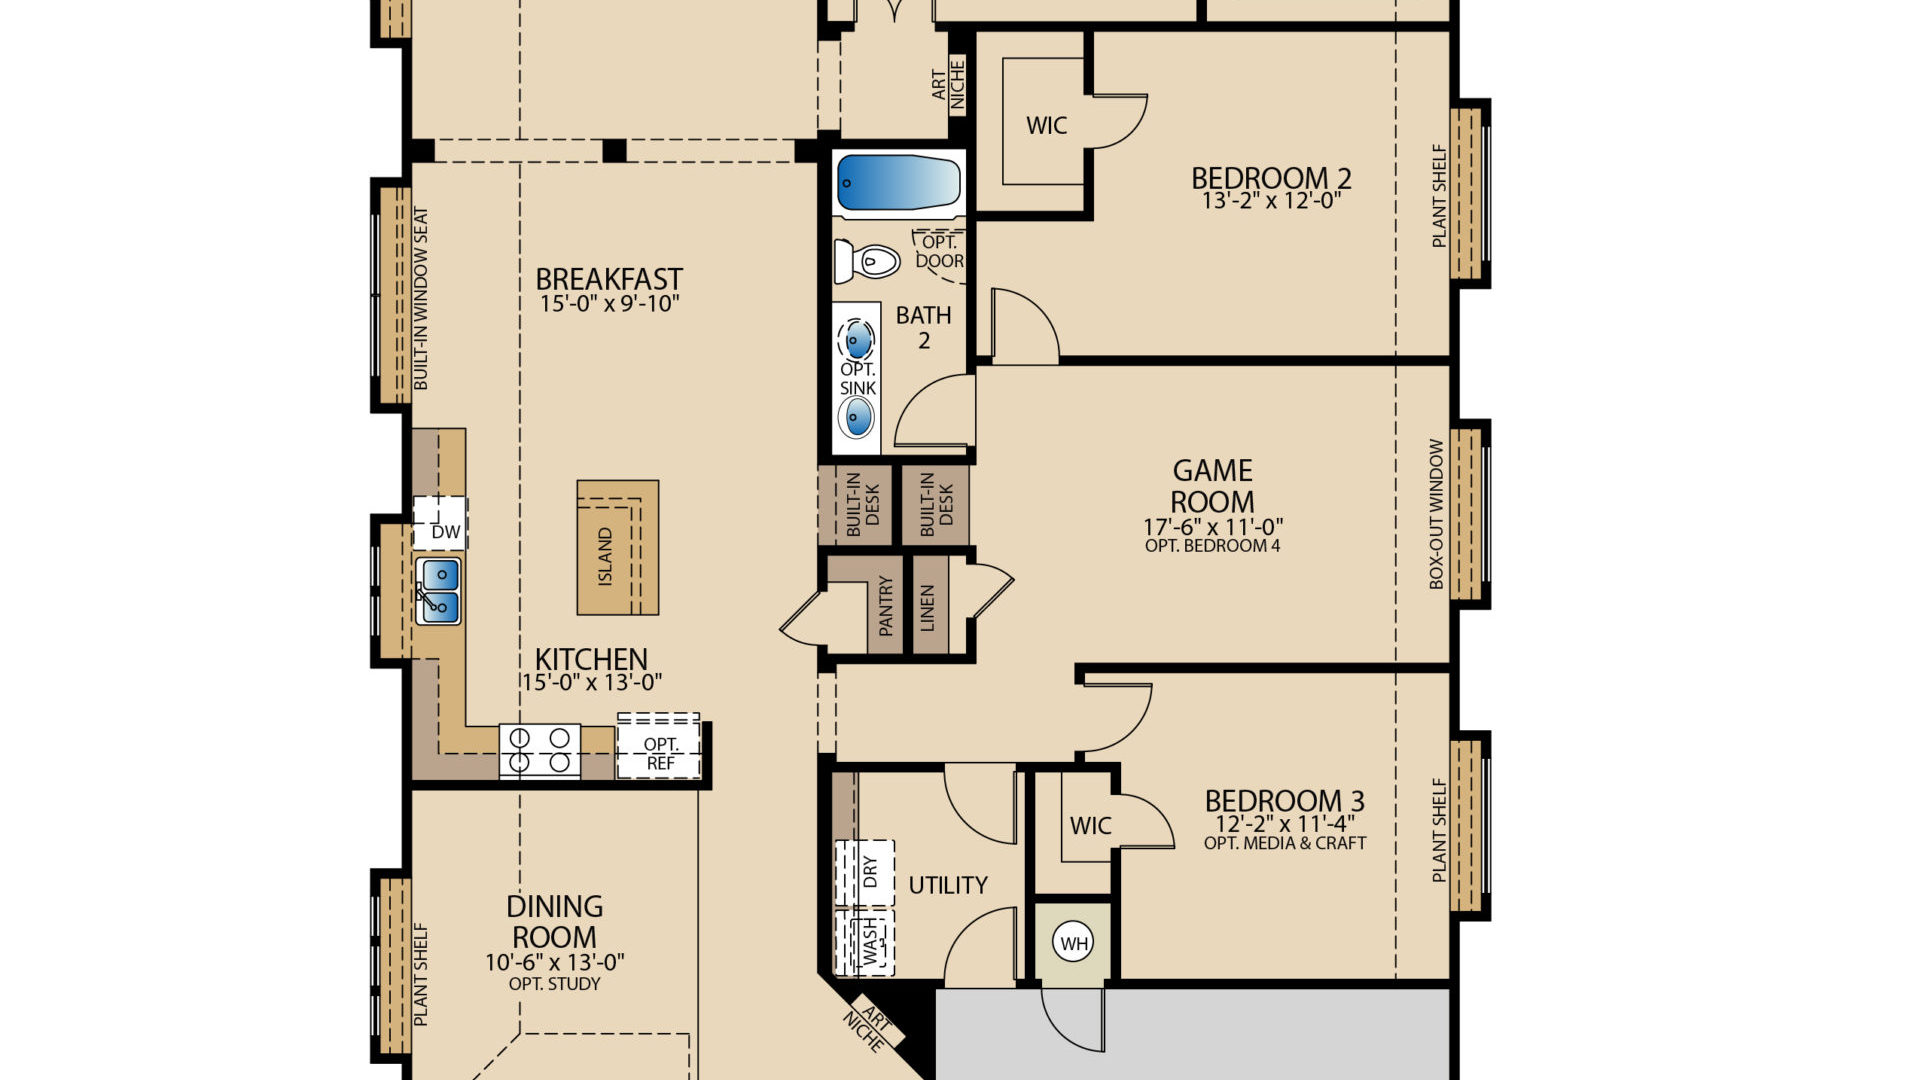 The Coral Cay Craftsman Series Floor Plan